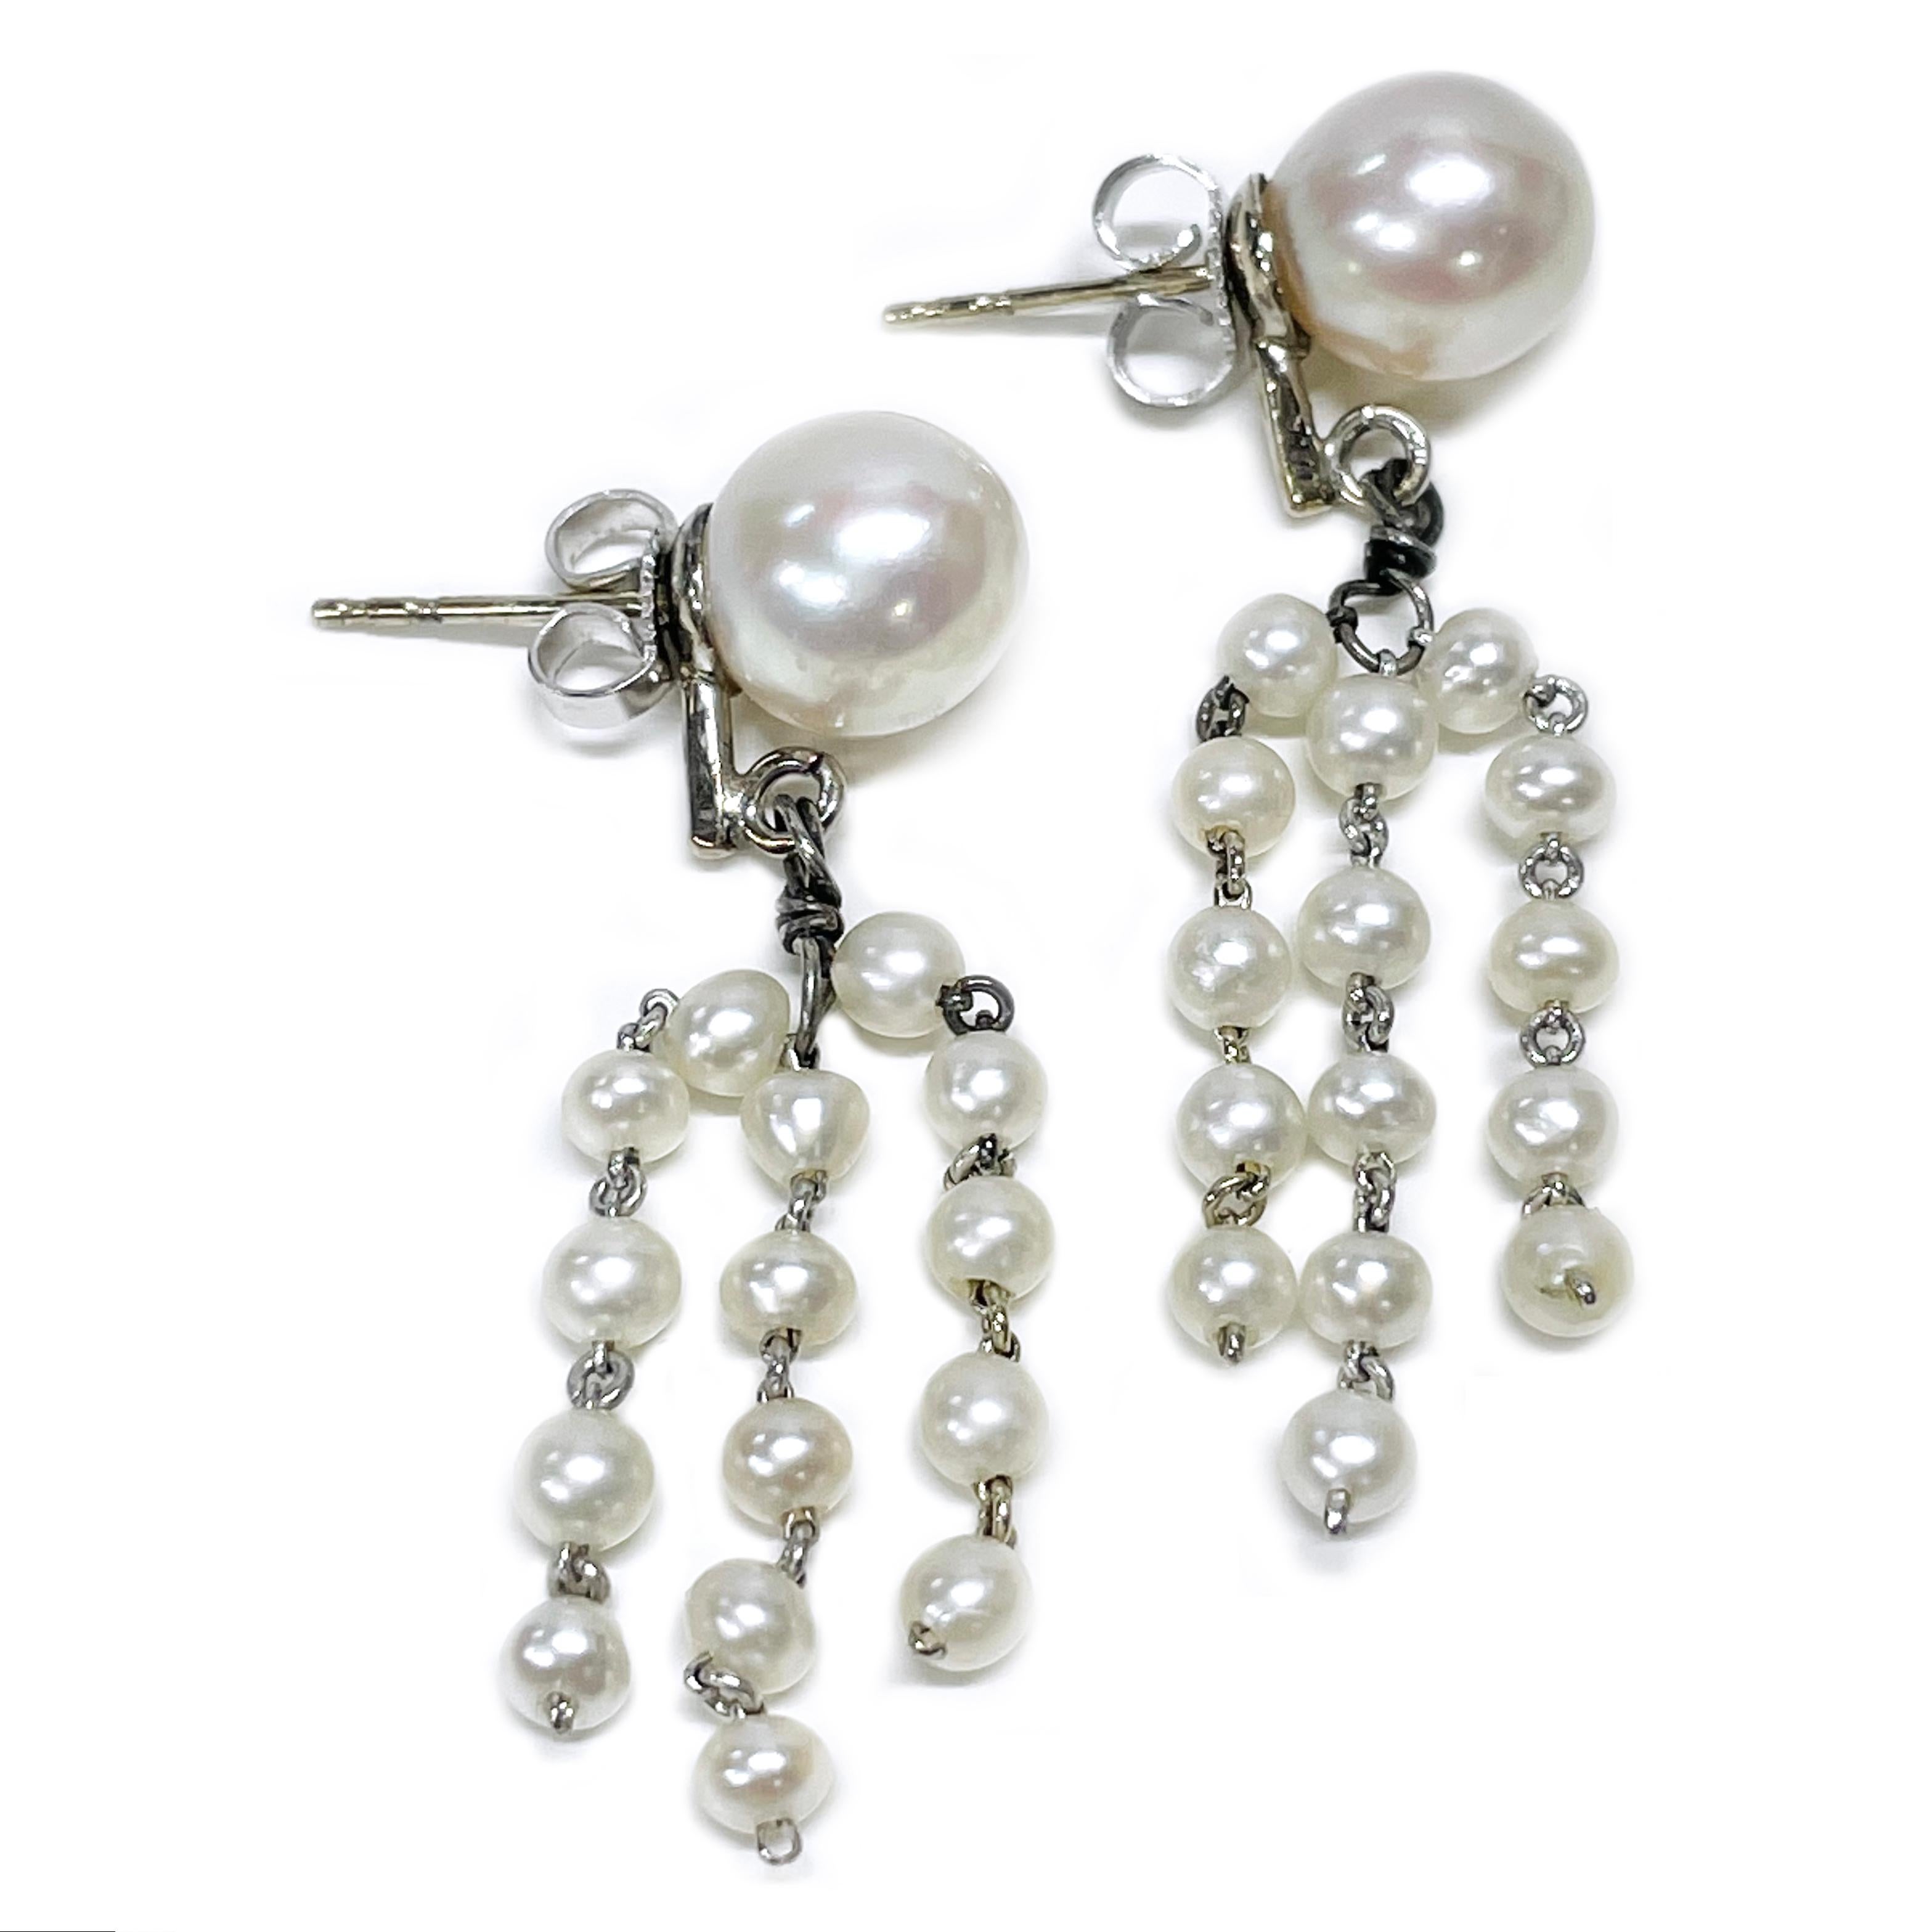 14 Karat White Gold Cultured Pearl Dangle Earrings. One pair of cultured pearl earrings. Each earring is comprised of one 8.0 to 8.5mm diameter close to spherical cultured pearl peg set onto a pad with three strands of five pearls each dangling from